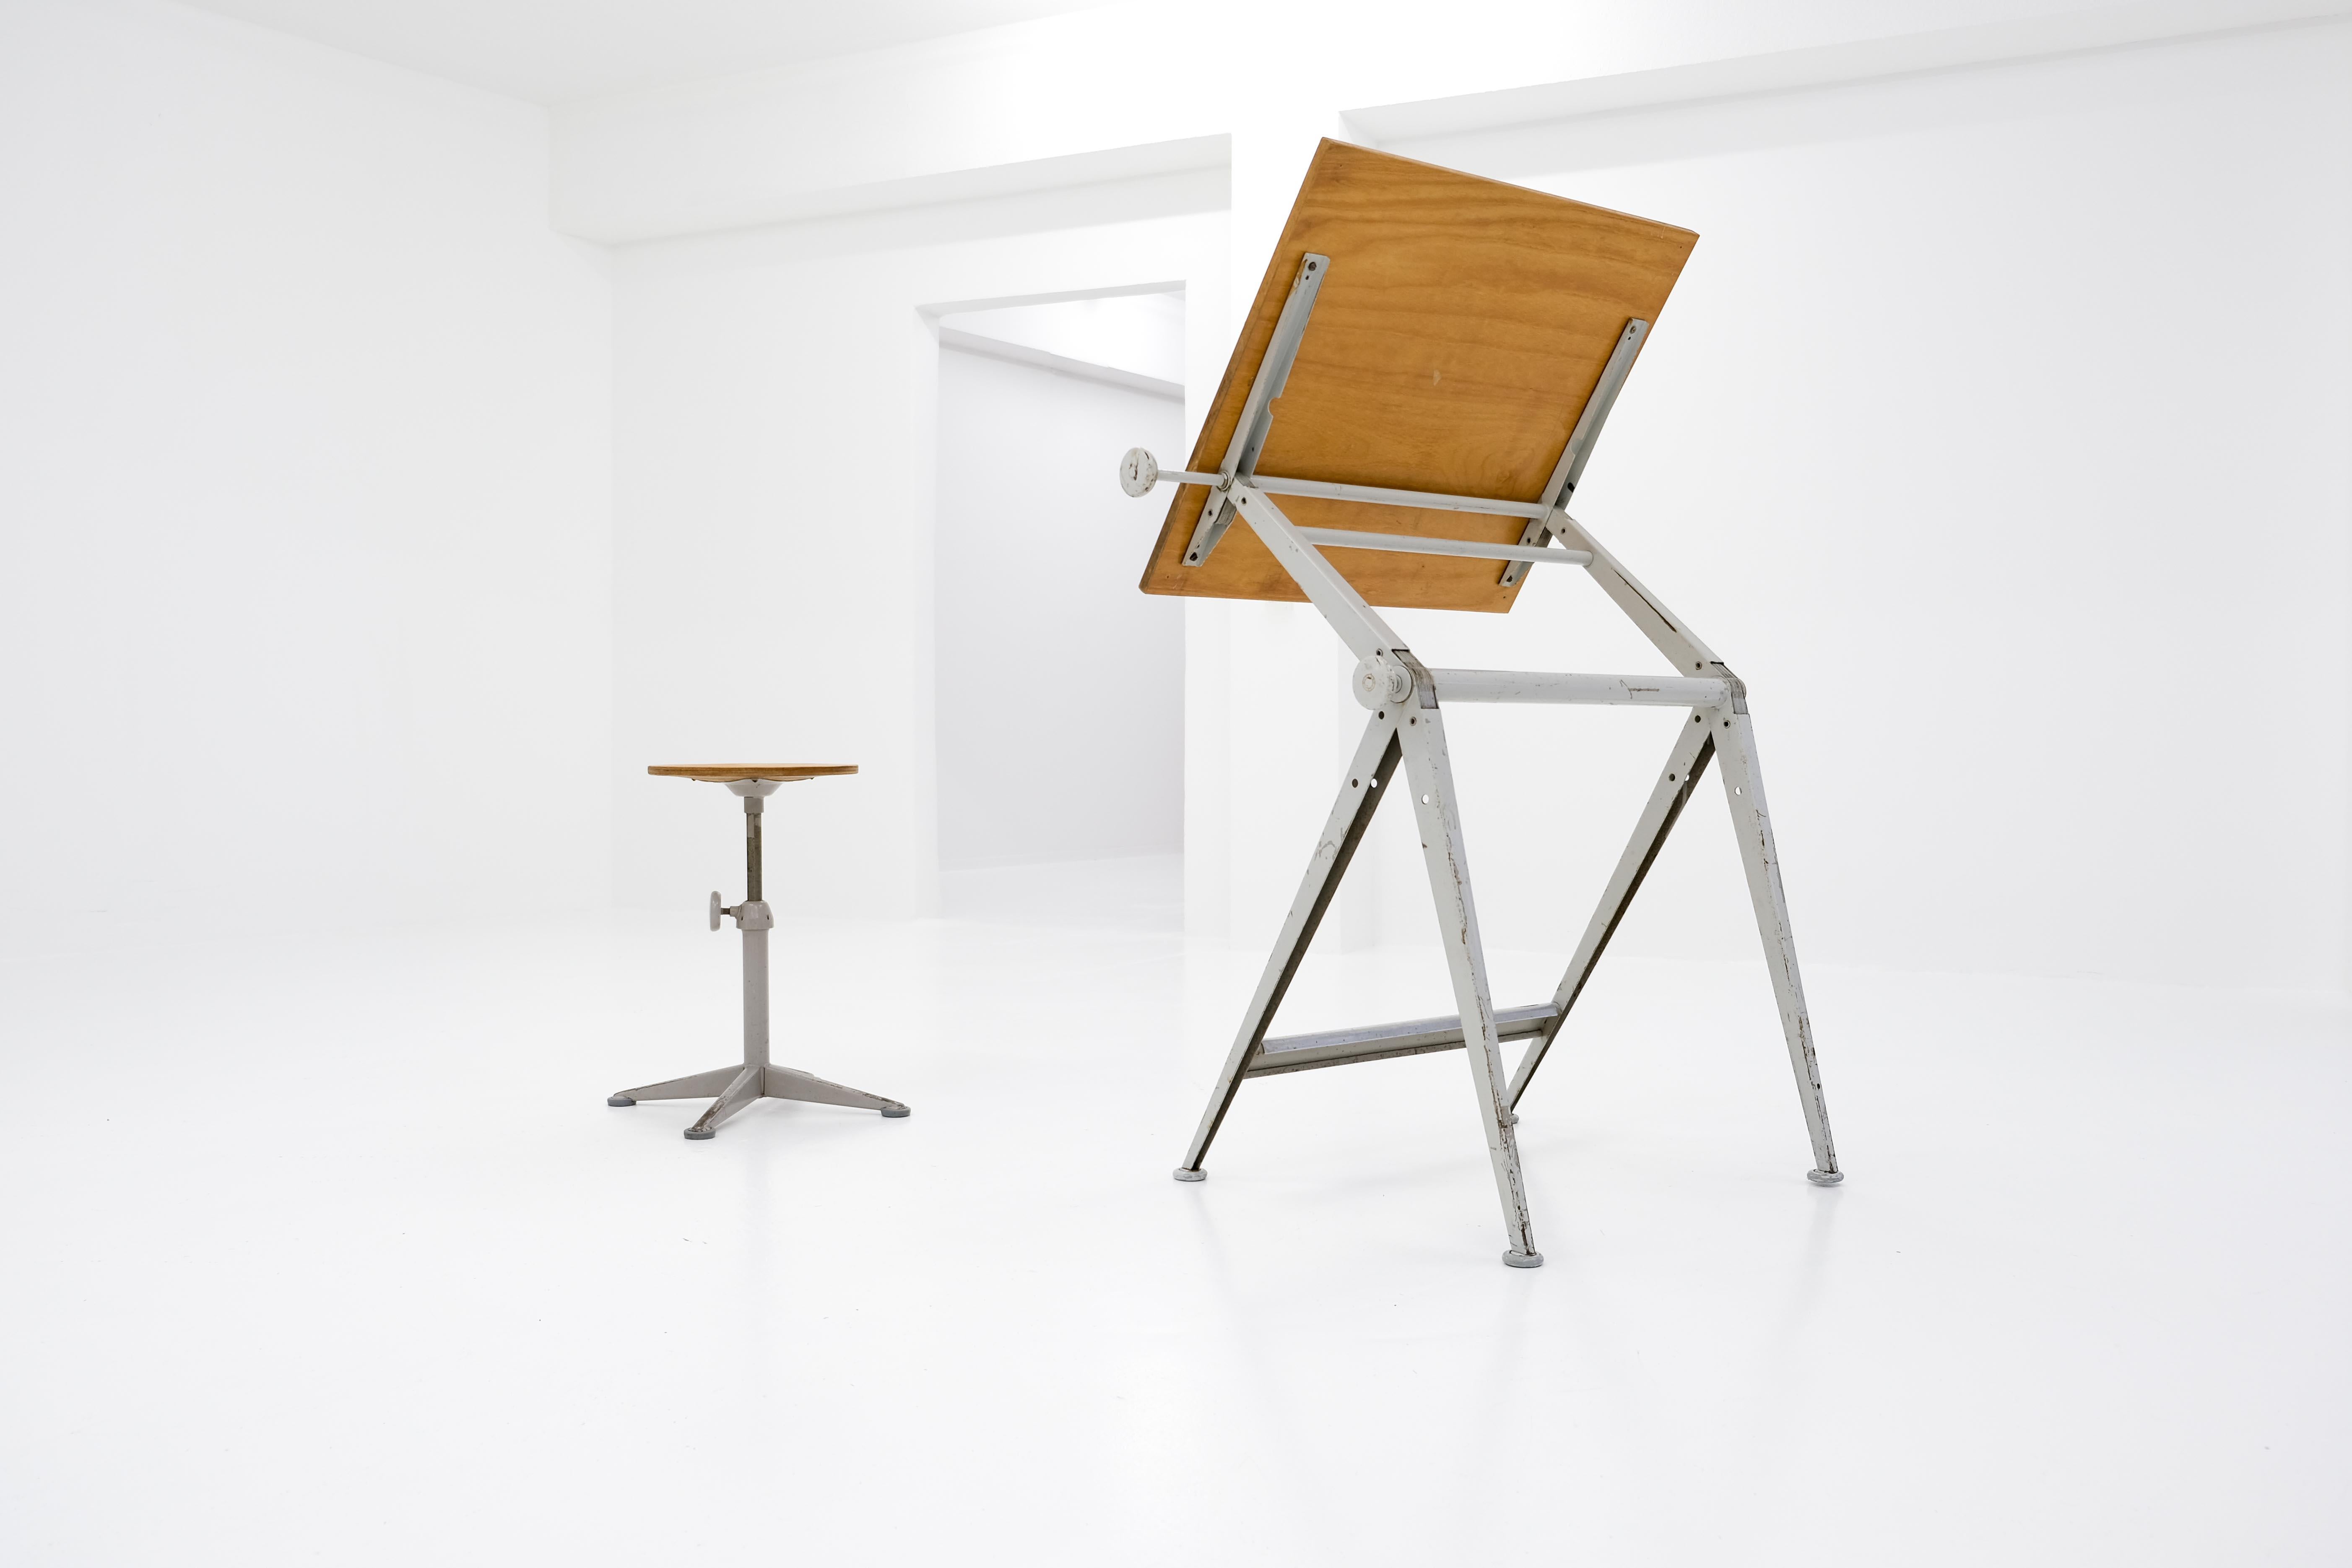 The ‚reply‘ drawing table, designed in the 1950s by friso kramer & wim rietveld, is adjustable continuously from horizontal to vertical. so it works as a desk, bar table, flipboard – and, no joke, we have already sold it: as a diaper changing table